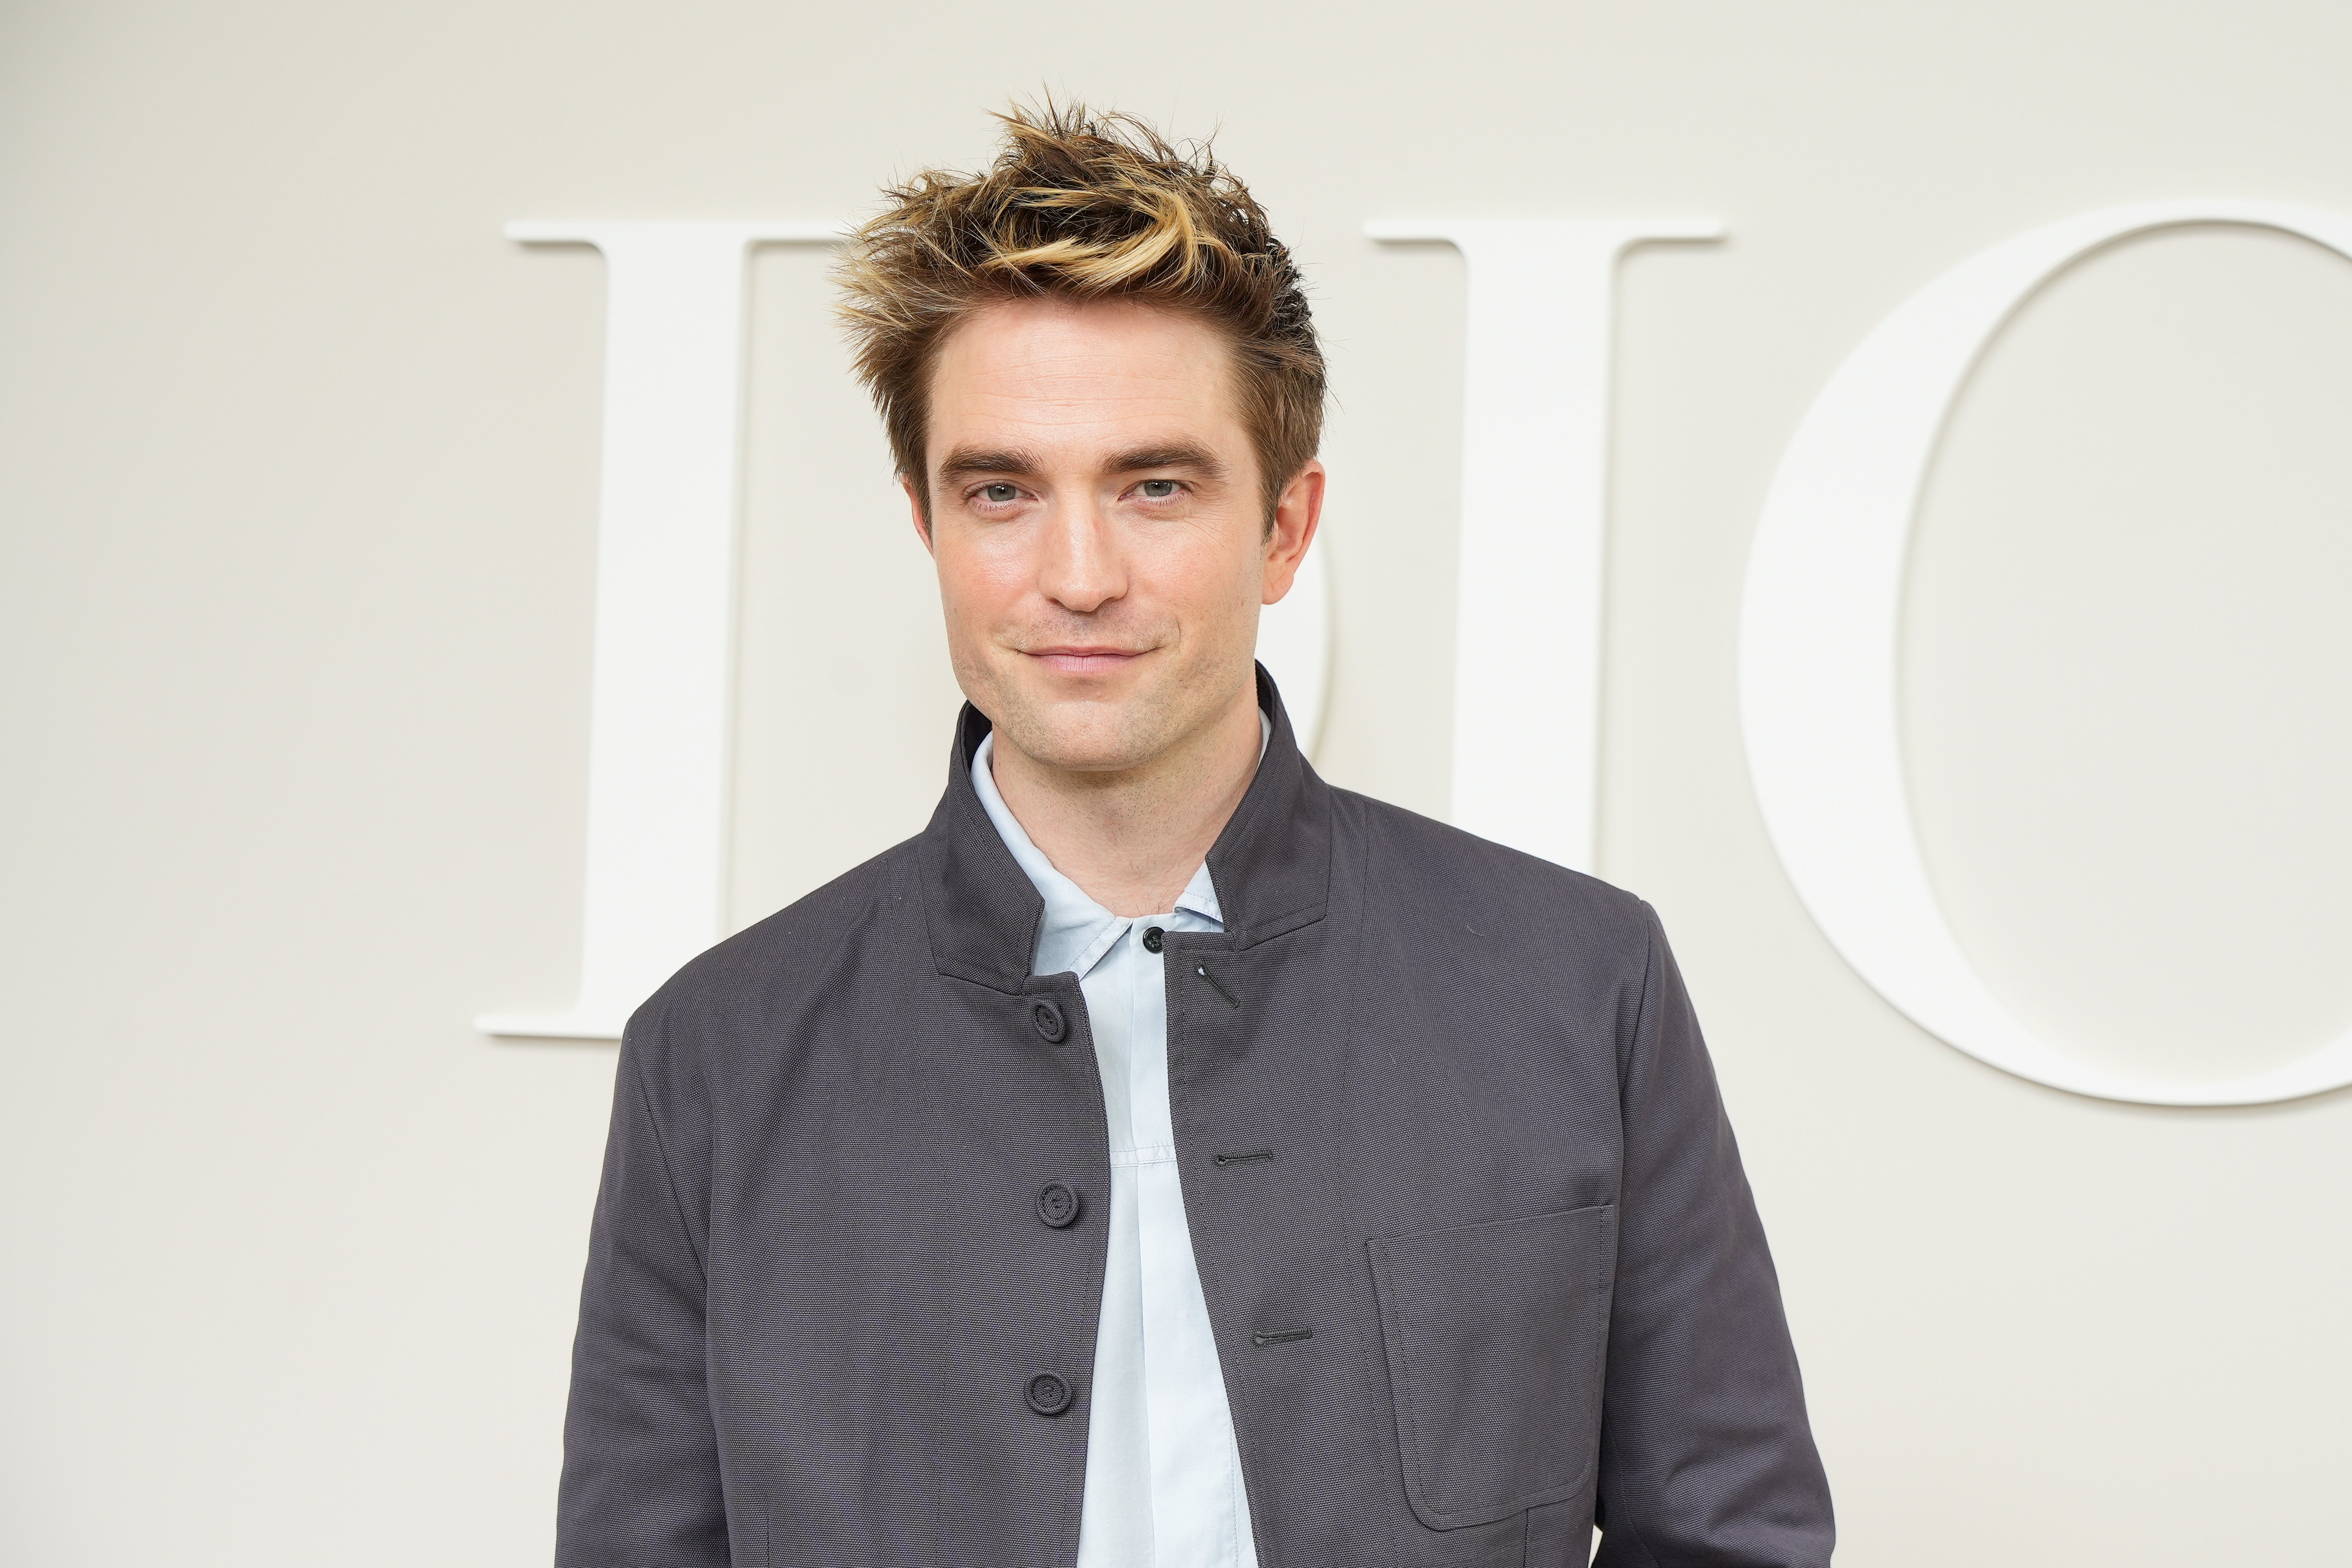 Robert Pattinson says he’s ‘amazed’ by three-month-old daughter’s personality